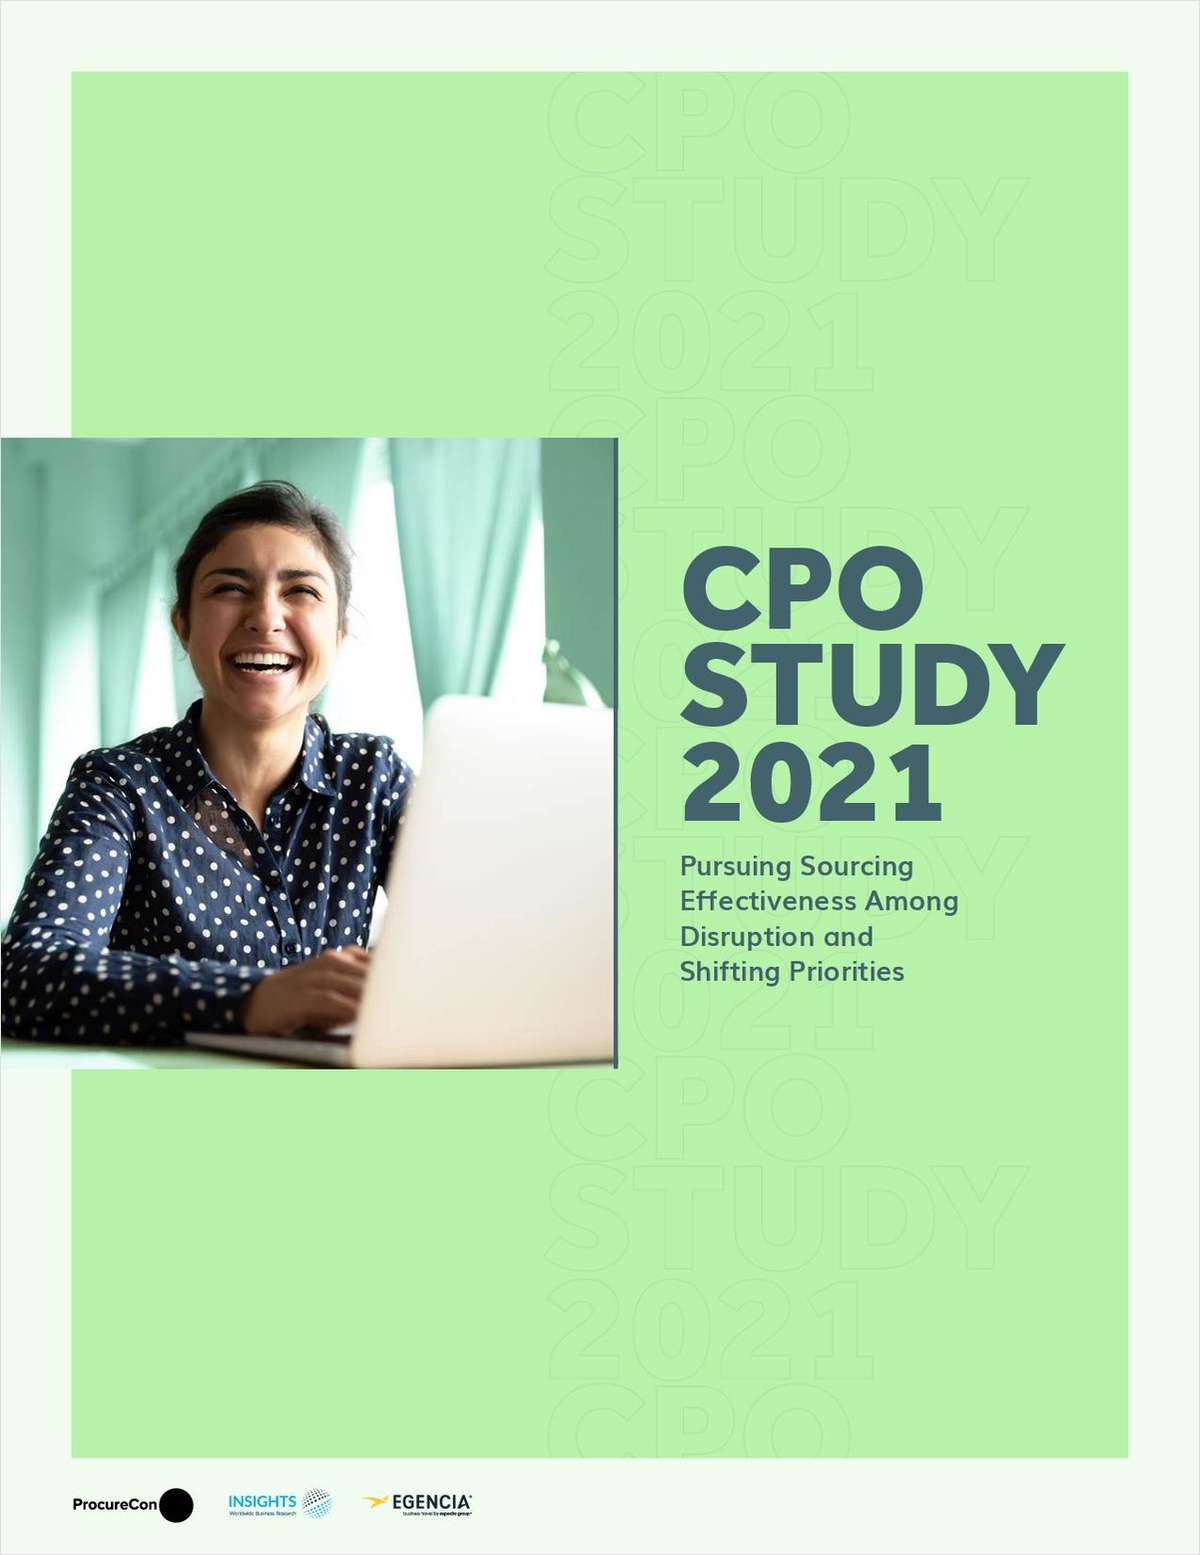 CPO Study 2021: Pursuing Sourcing Effectiveness Among Disruption and Shifting Priorities